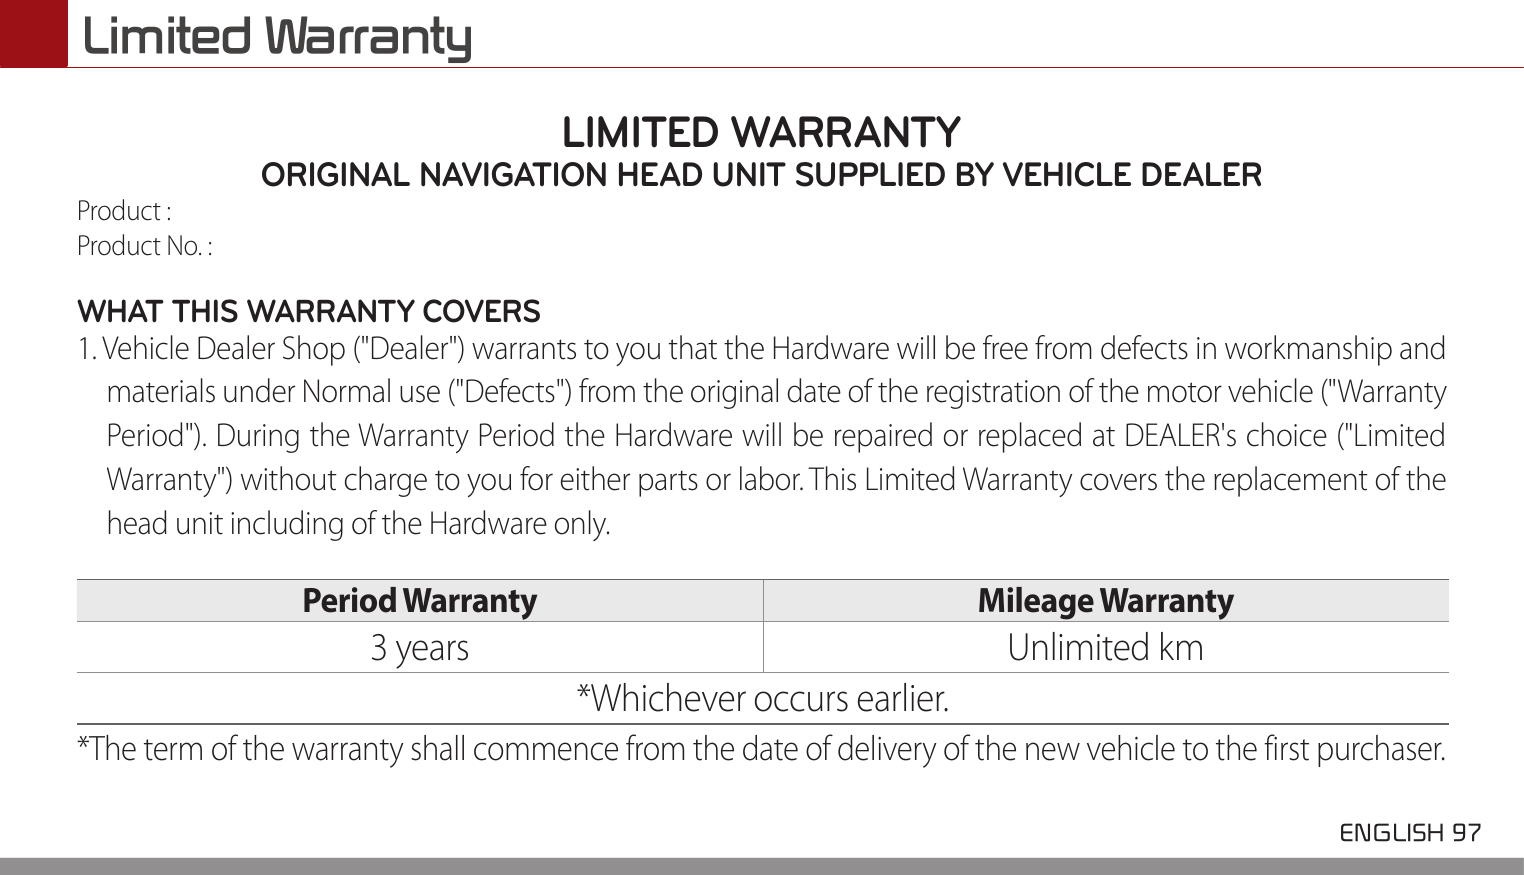  ENGLISH 97 Limited WarrantyLIMITED WARRANTYORIGINAL NAVIGATION HEAD UNIT SUPPLIED BY VEHICLE DEALER Product : Product No. : WHAT THIS WARRANTY COVERS 1. Vehicle Dealer Shop (&quot;Dealer&quot;) warrants to you that the Hardware will be free from defects in workmanship and materials under Normal use (&quot;Defects&quot;) from the original date of the registration of the motor vehicle (&quot;Warranty Period&quot;). During the Warranty Period the Hardware will be repaired or replaced at DEALER&apos;s choice (&quot;Limited Warranty&quot;) without charge to you for either parts or labor. This Limited Warranty covers the replacement of the head unit including of the Hardware only. Period Warranty  Mileage Warranty 3 years Unlimited km*Whichever occurs earlier.*The term of the warranty shall commence from the date of delivery of the new vehicle to the first purchaser.